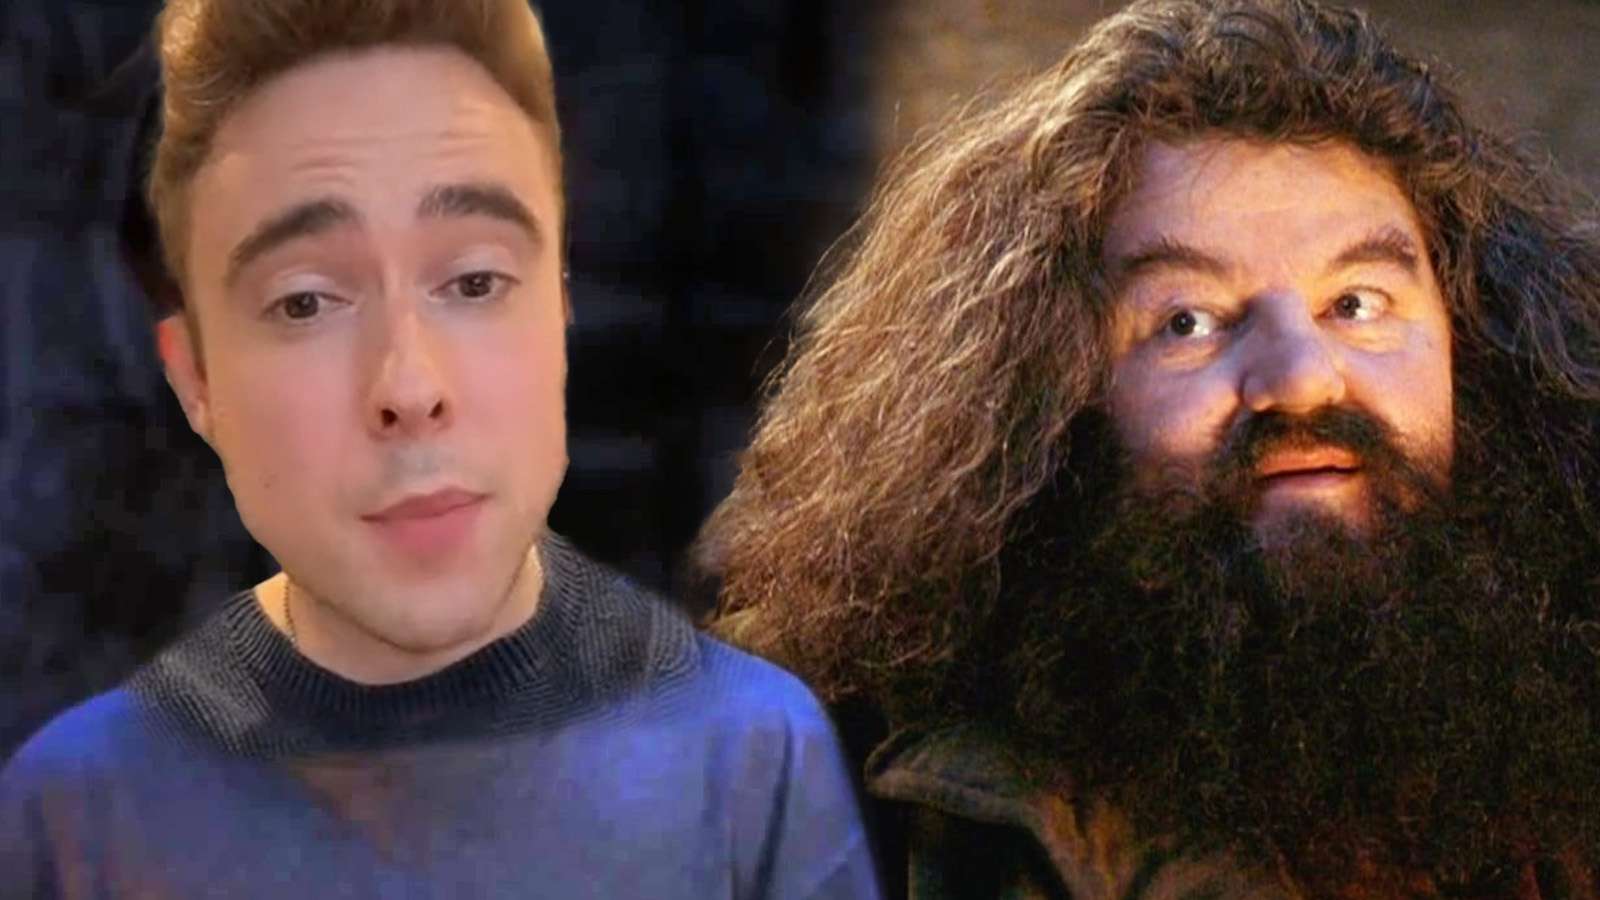 British man named Harry Potter shares how ridiculous his life is